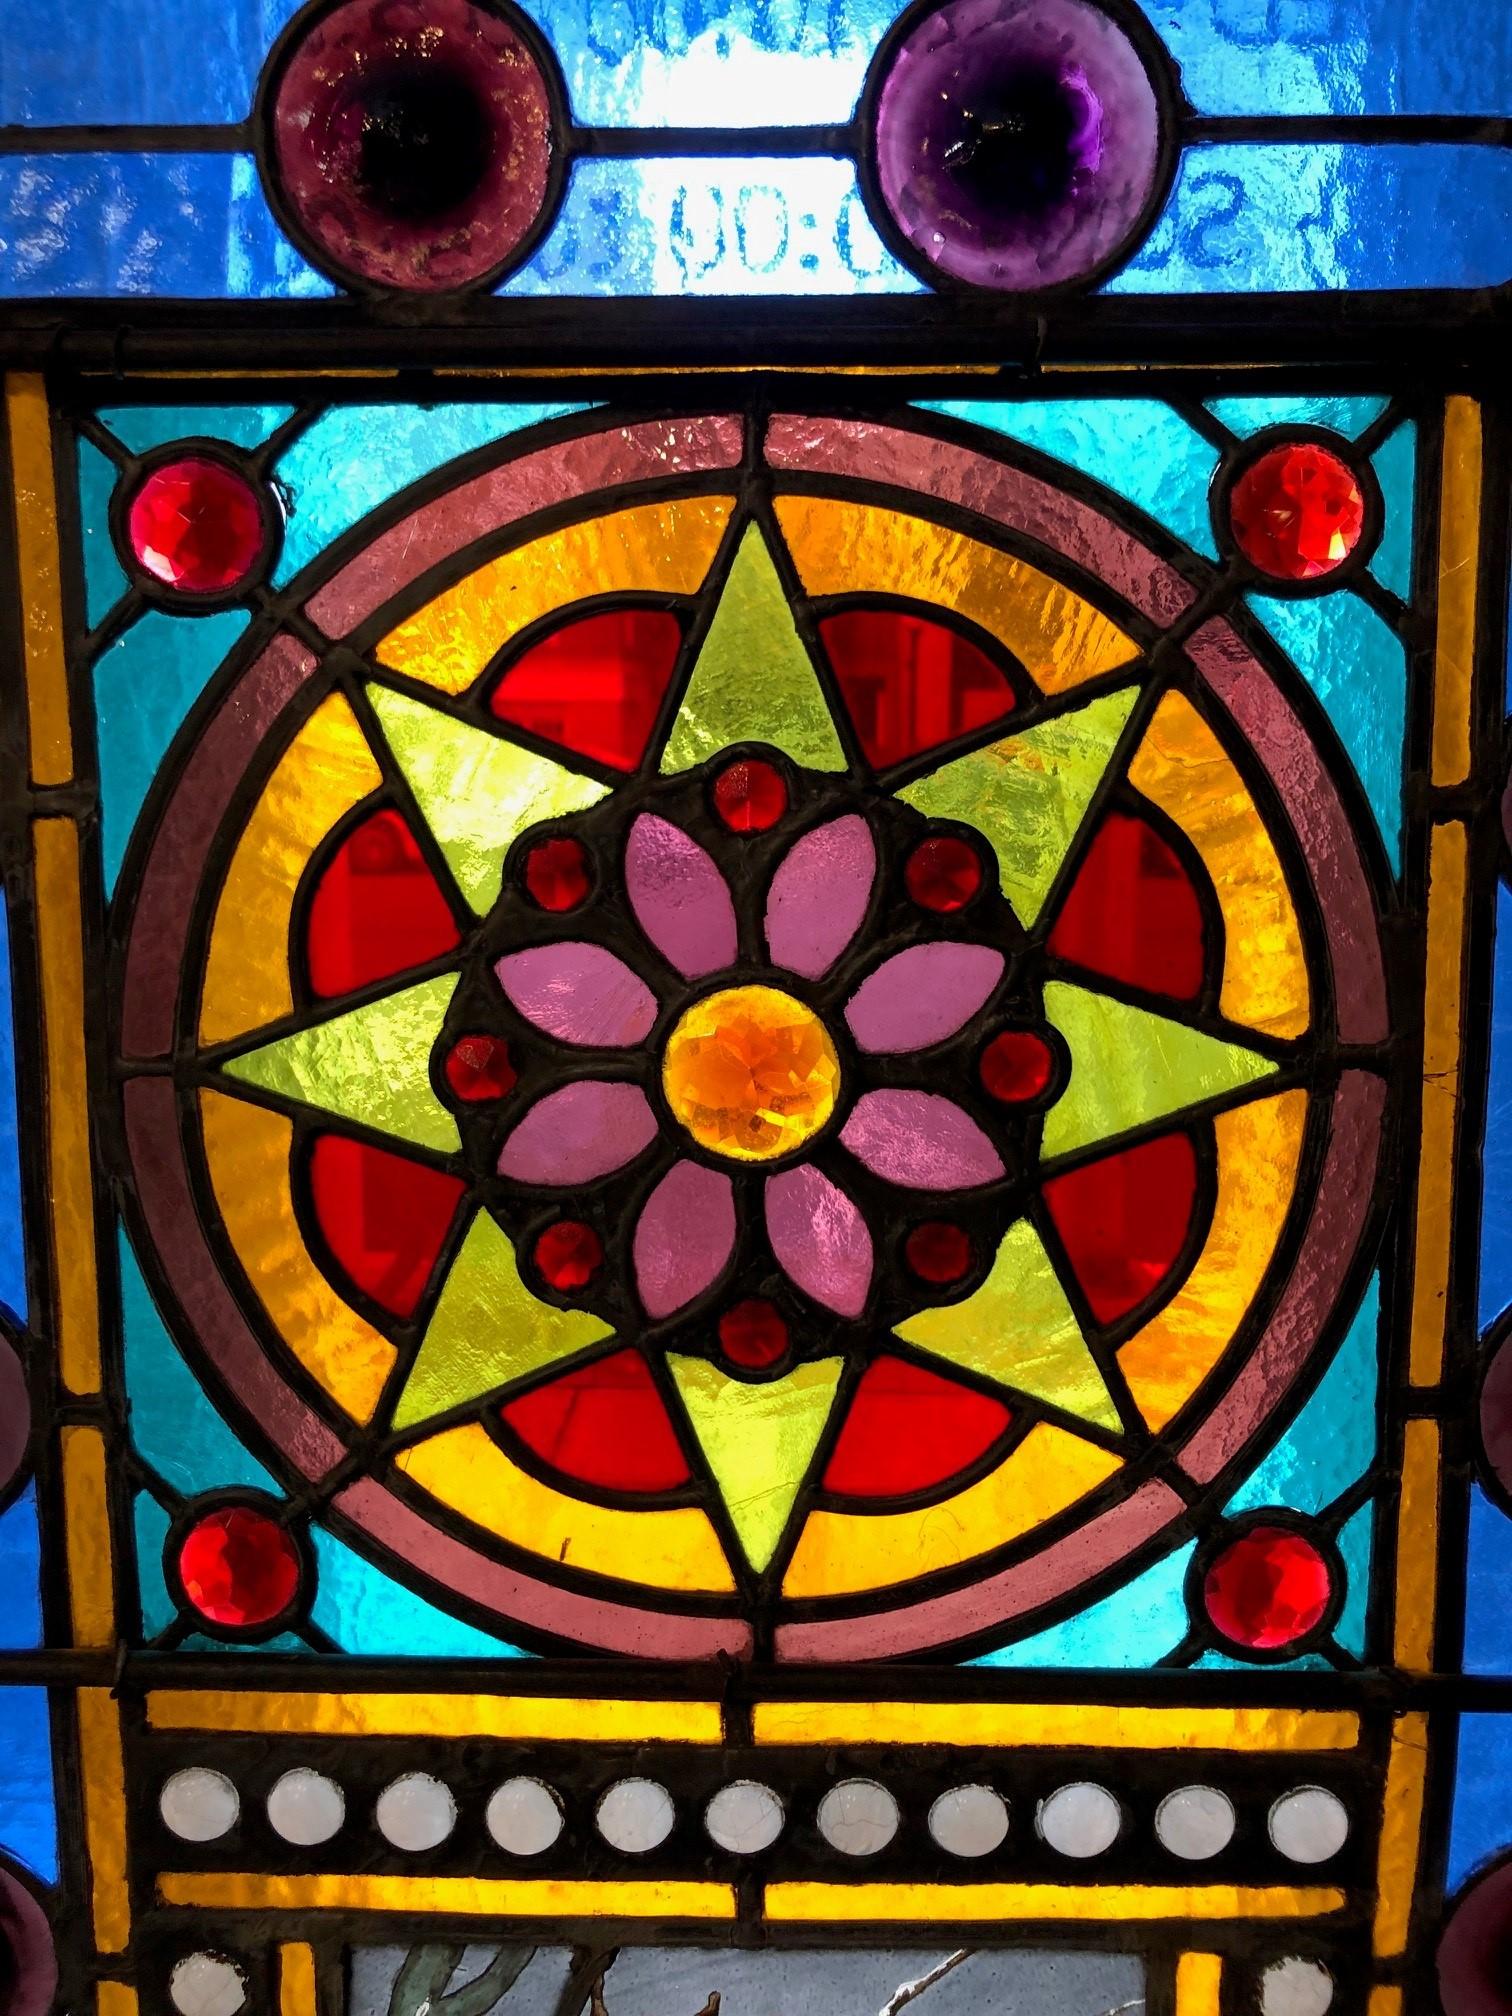 19th century stained glass windows